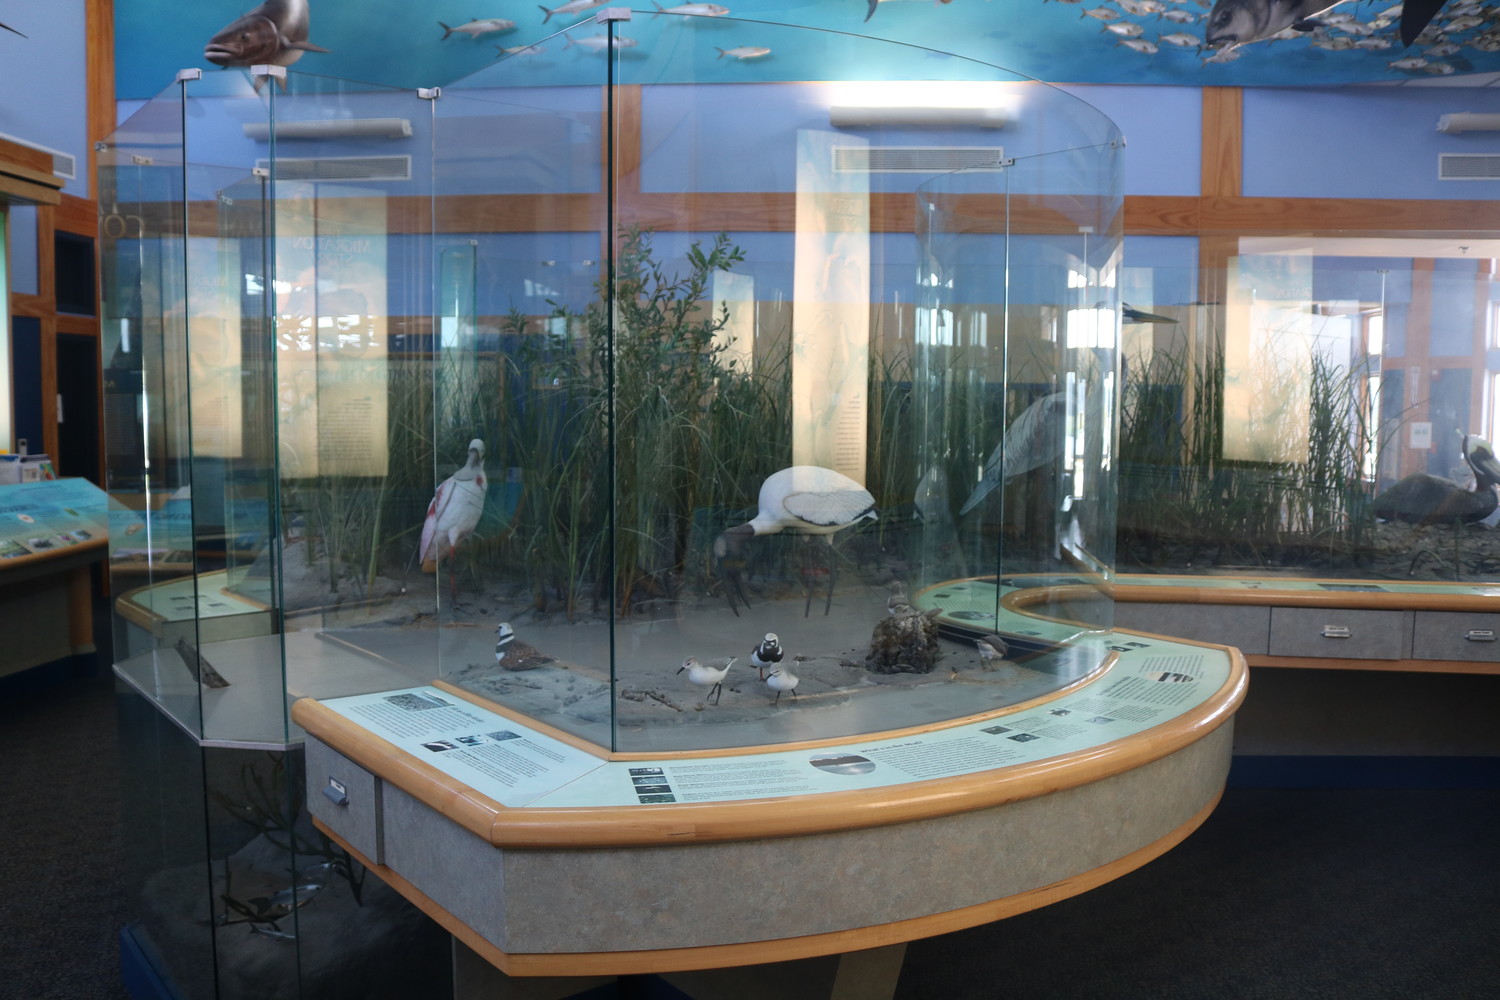 Visitors can enjoy exhibits at the GTM Reserve’s Environmental Education Center, located at 505 Guana River Road in Ponte Vedra Beach.